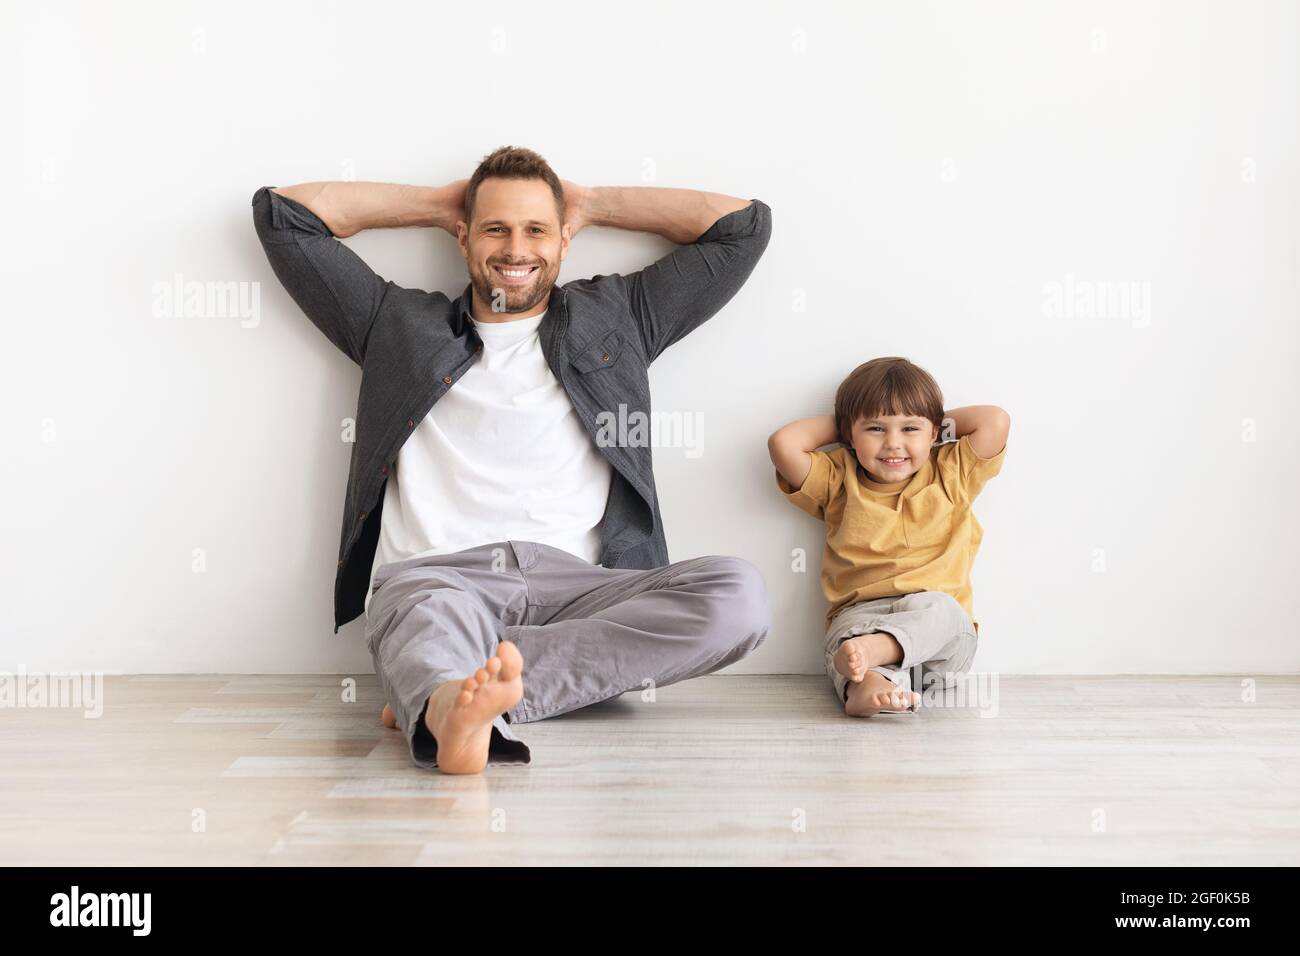 Little Smiling Boy Sitting Barefoot, Isolated On White Stock Photo, Picture  and Royalty Free Image. Image 6207823.